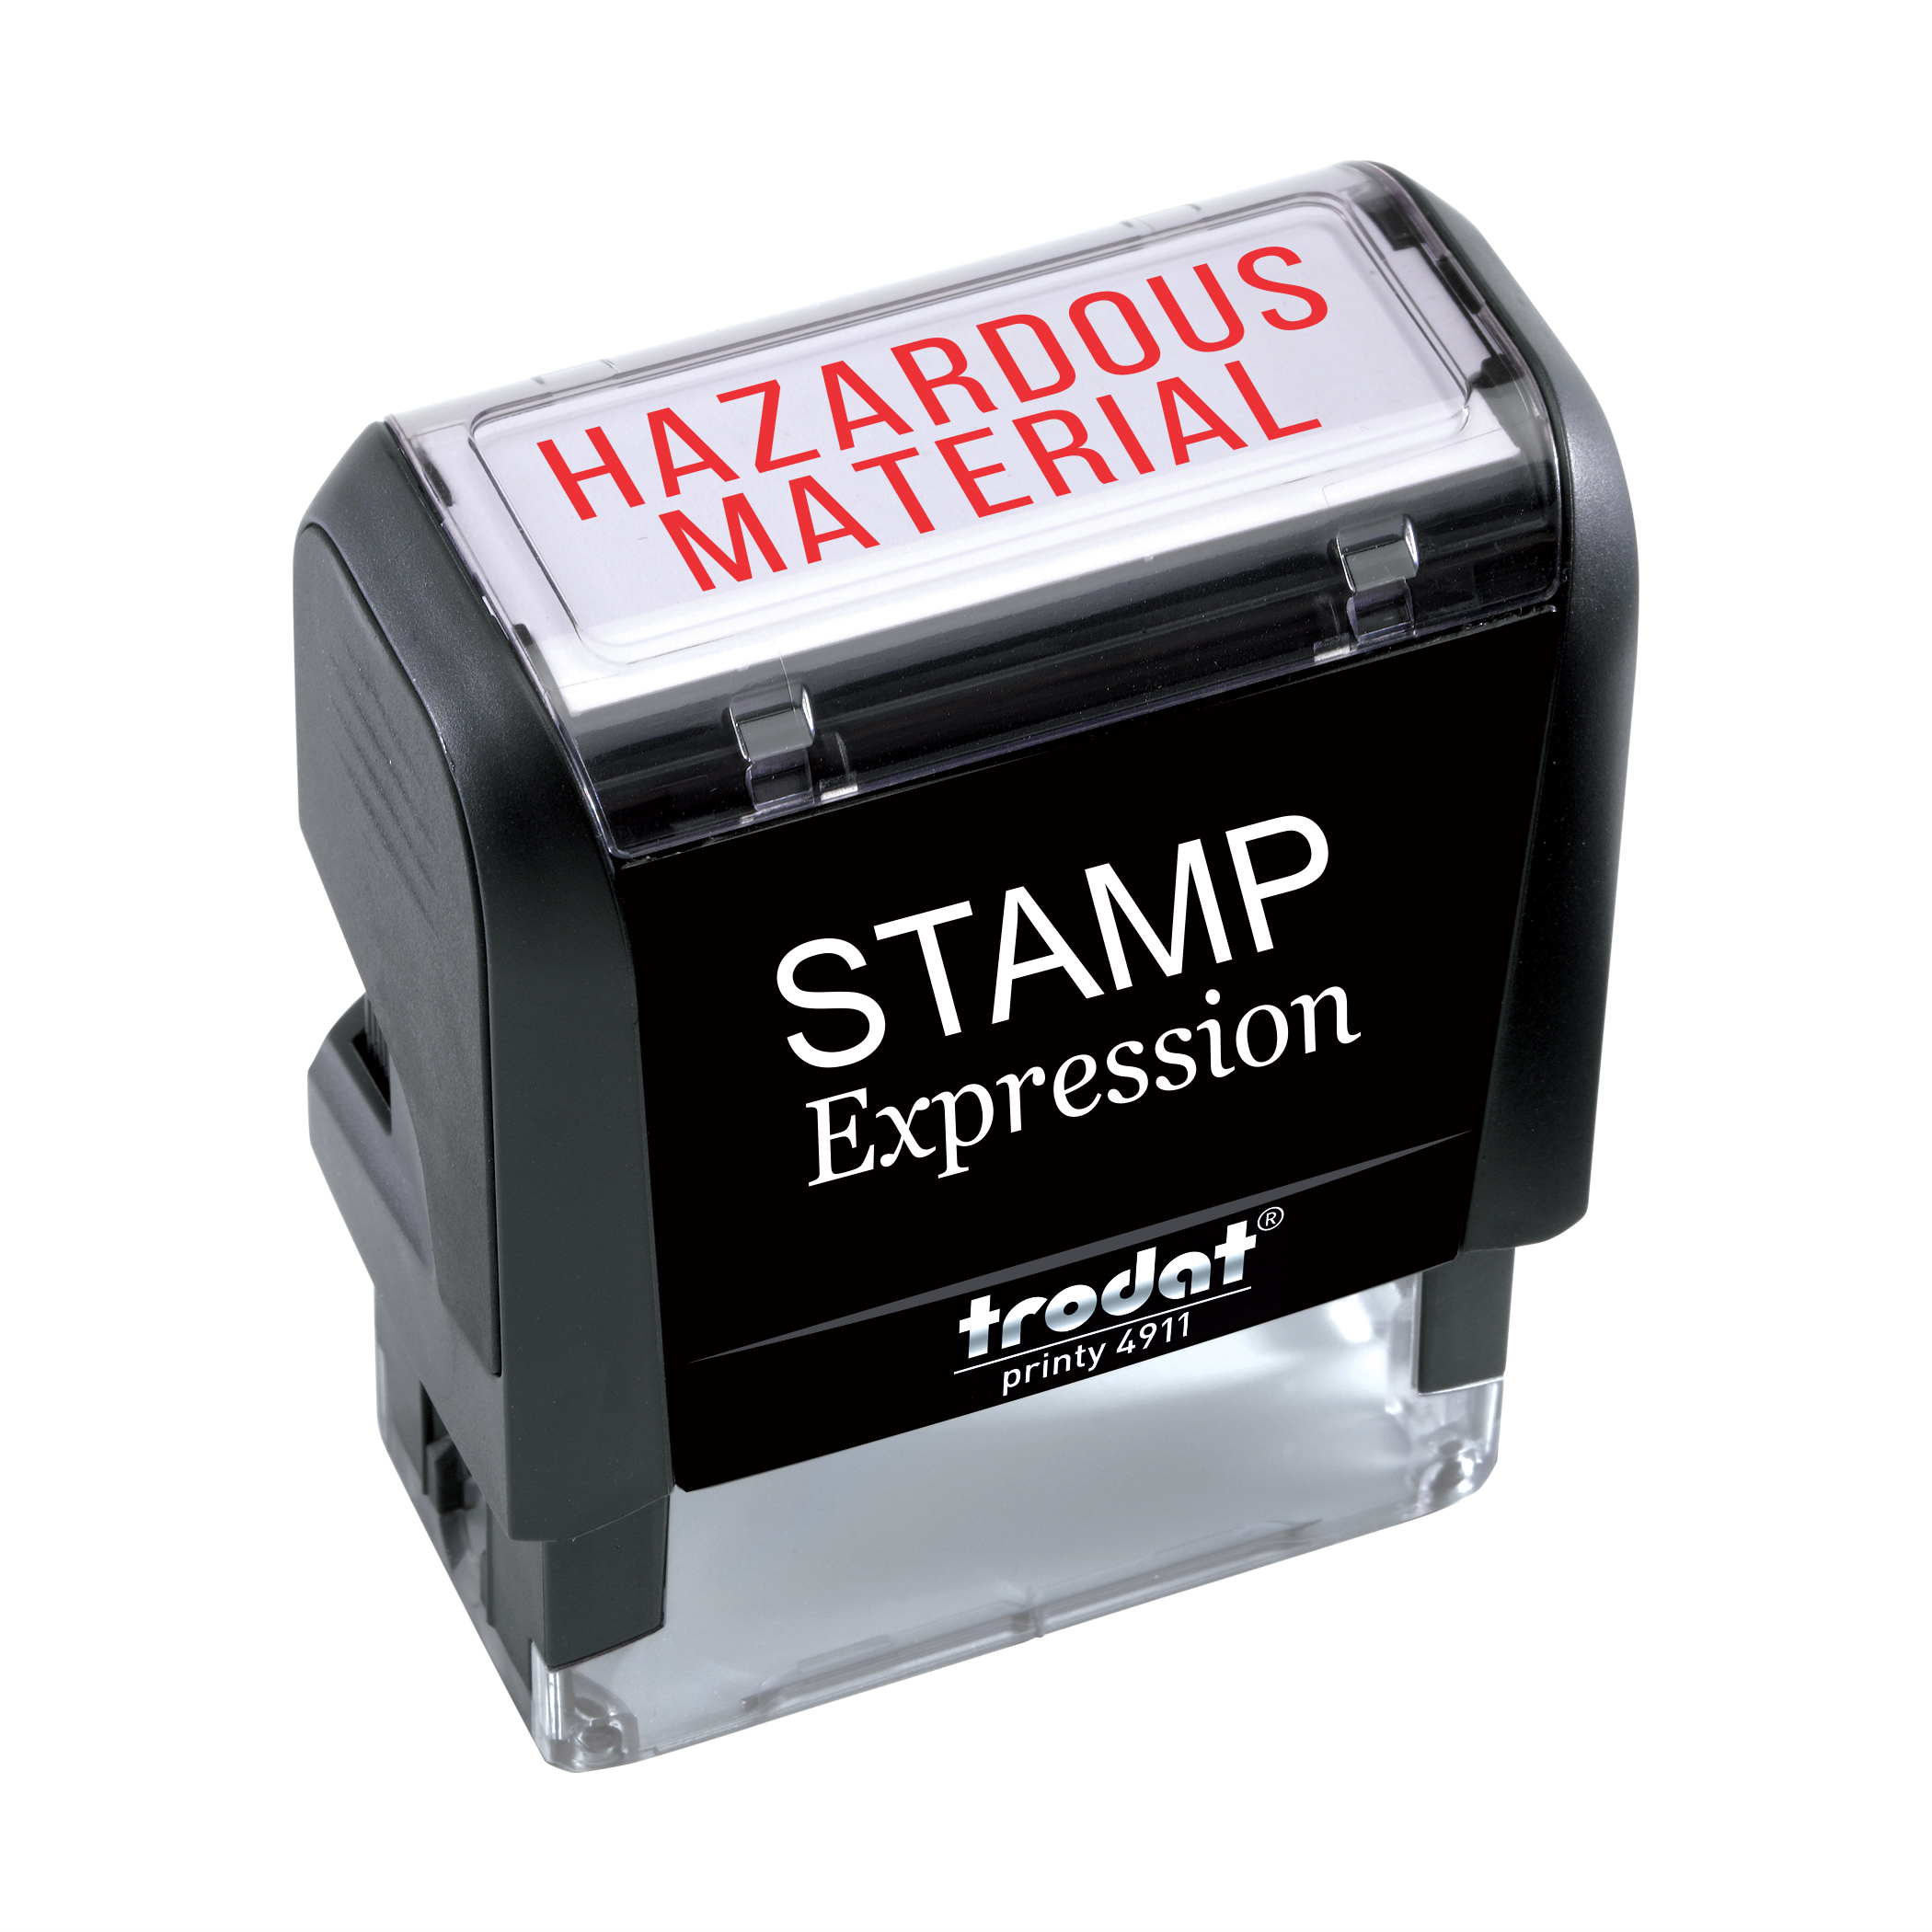 Hazardous Material Office Self Inking Rubber Stamp